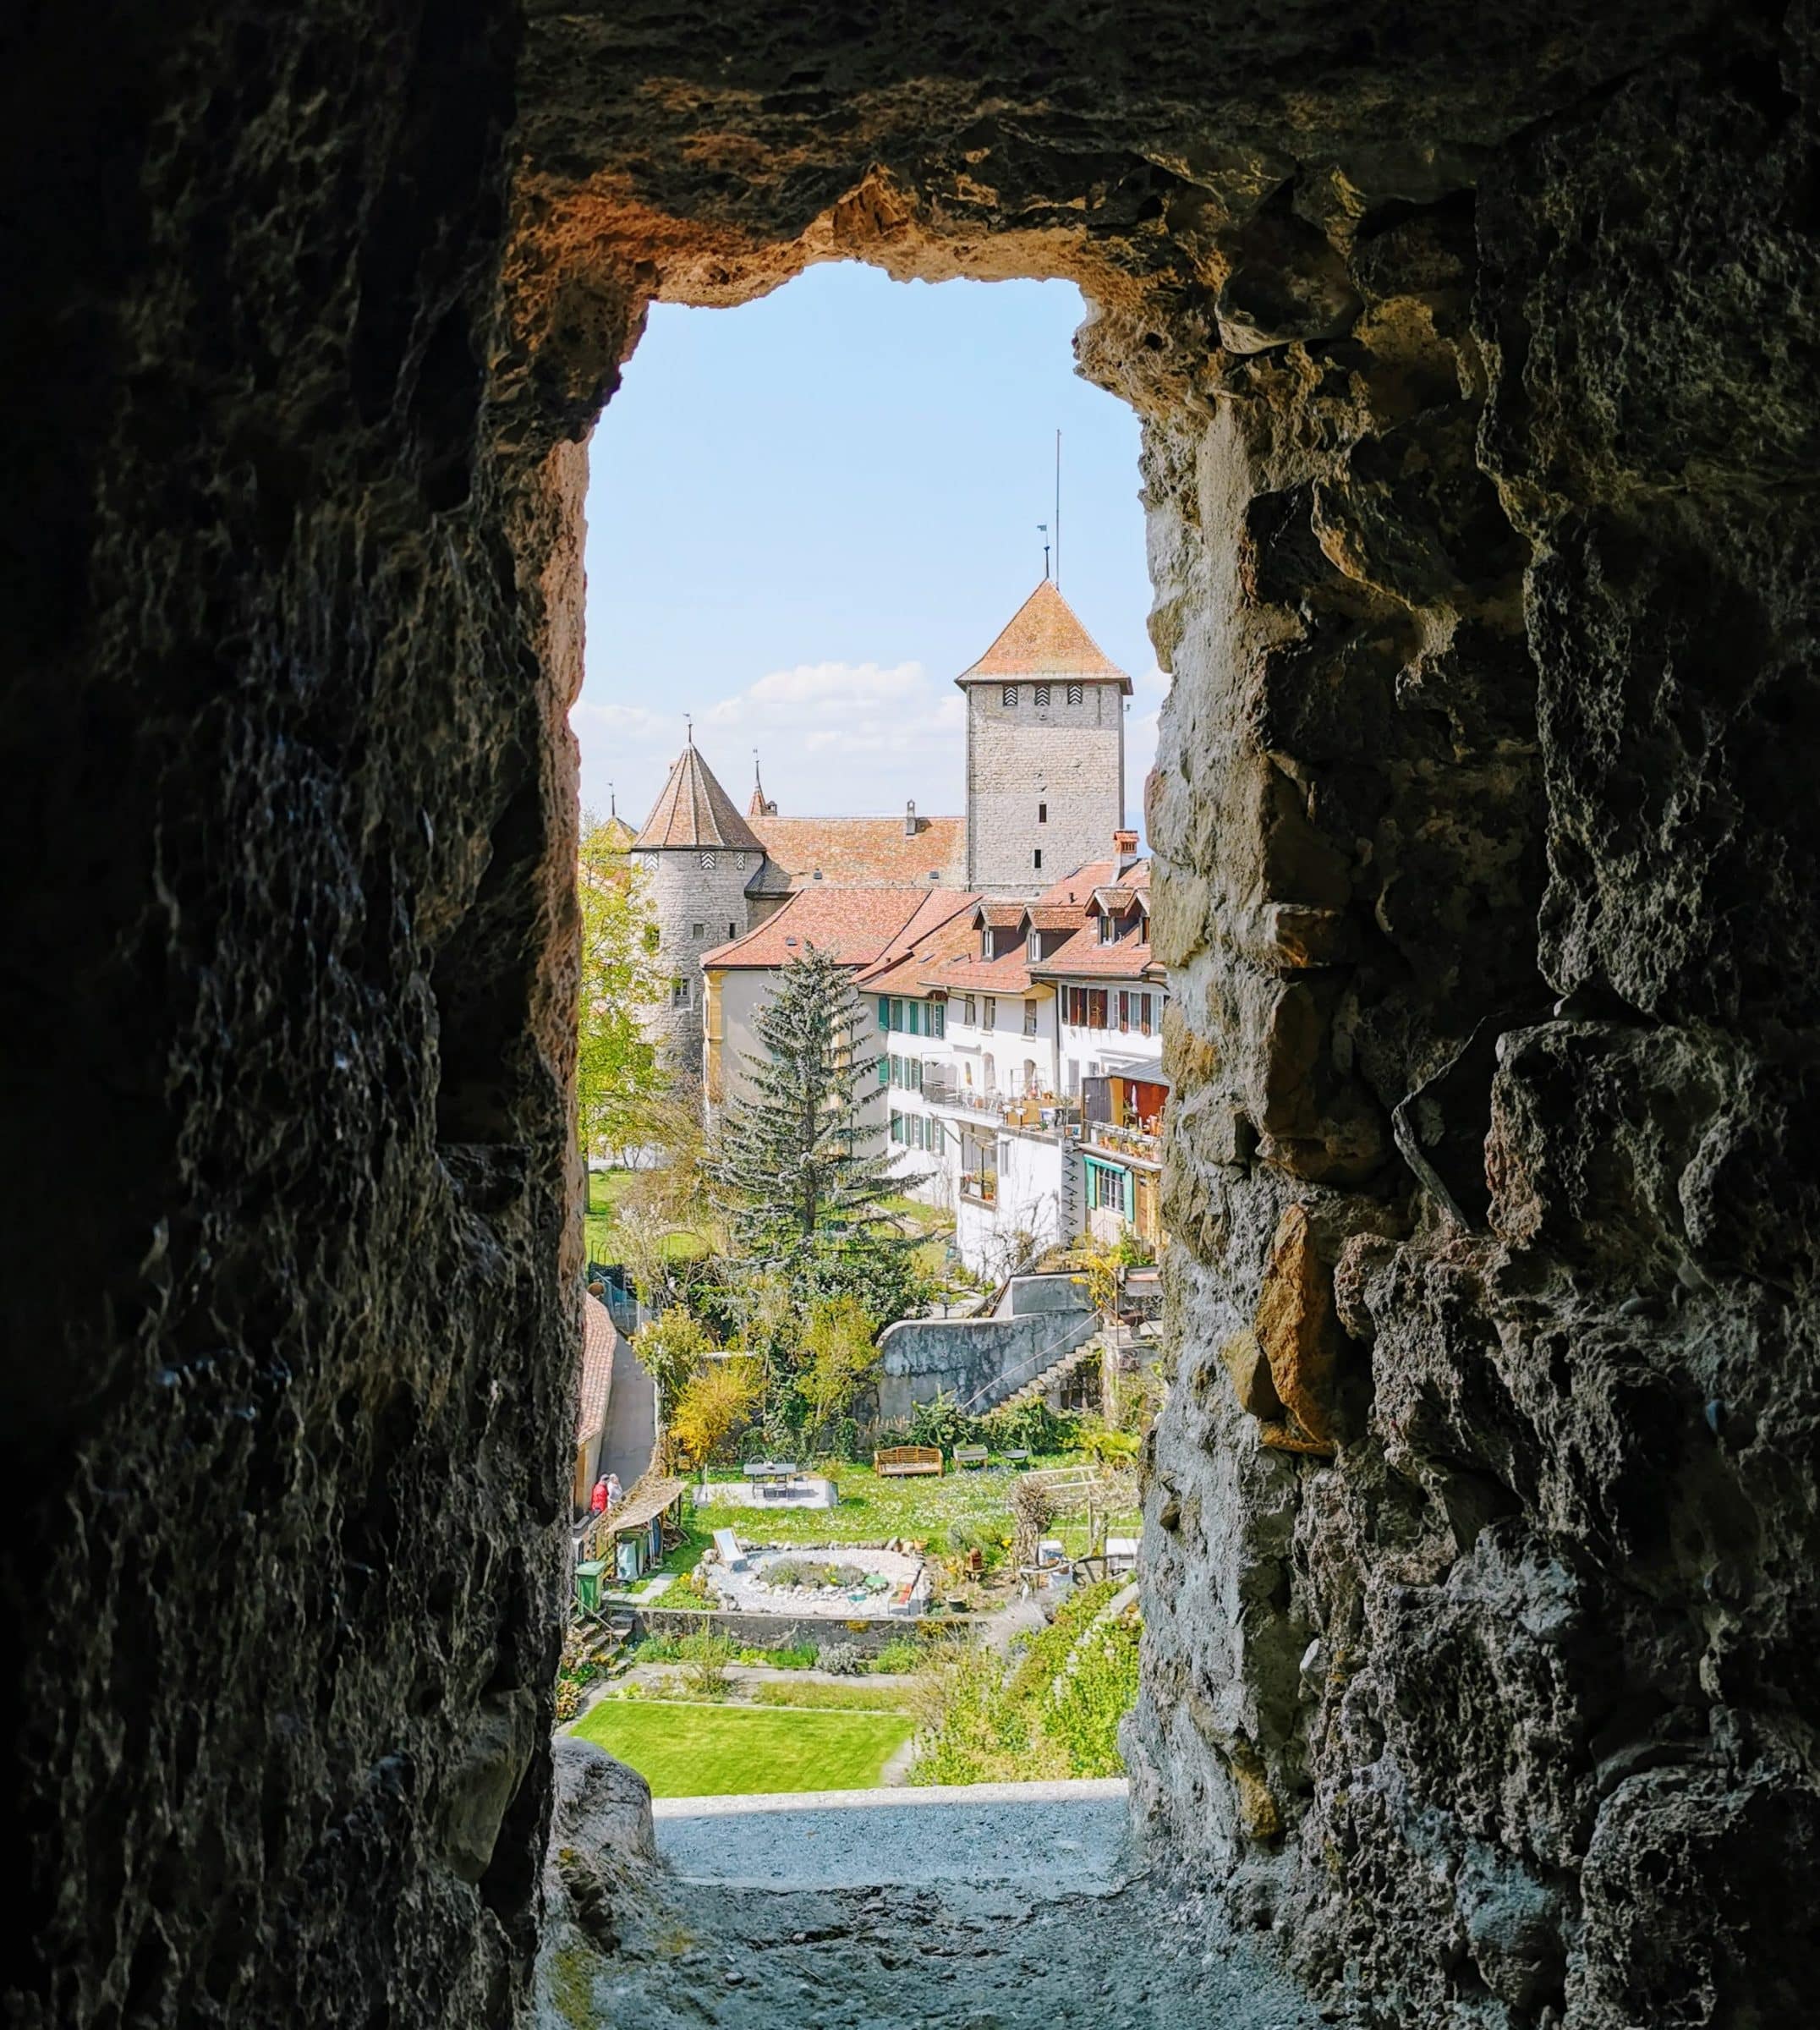 The old castle of Murten from the southern city wall